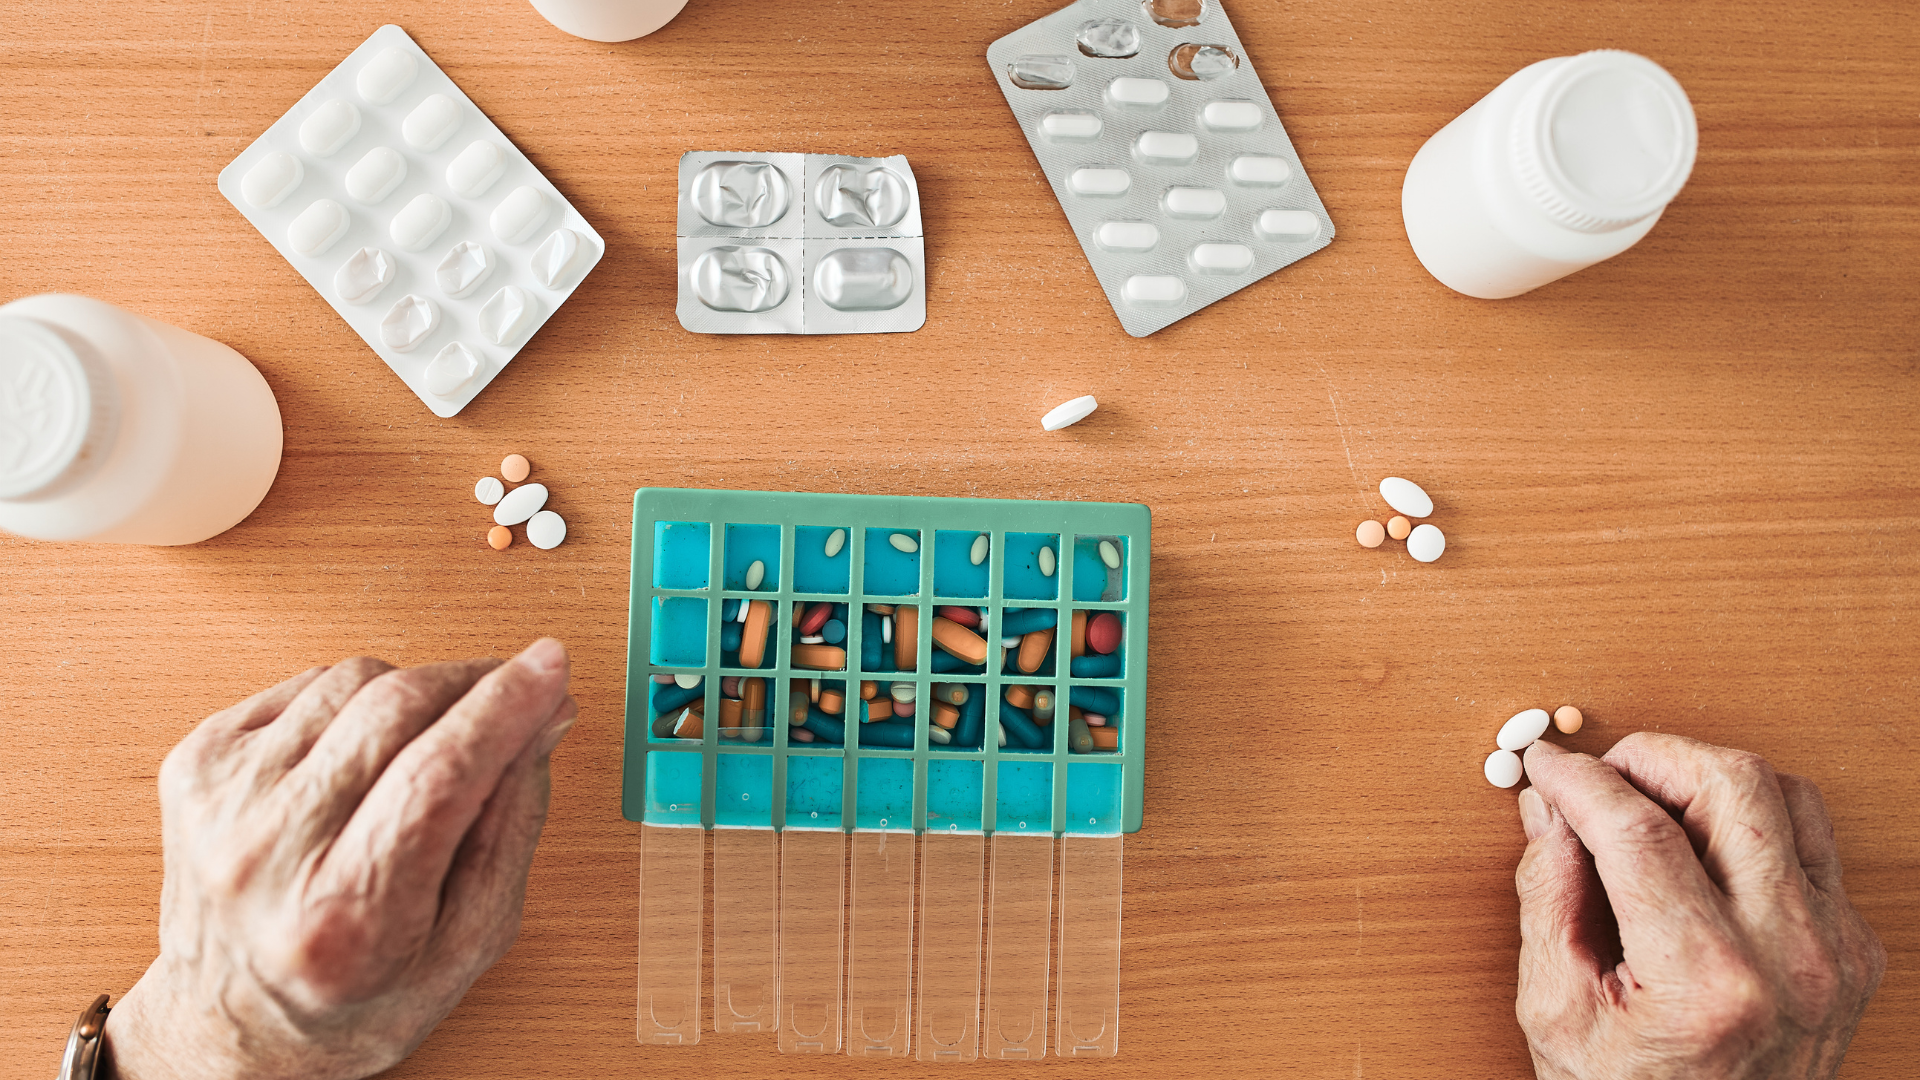 An older person organizes their medications amidst medication bottles and medication blister packs